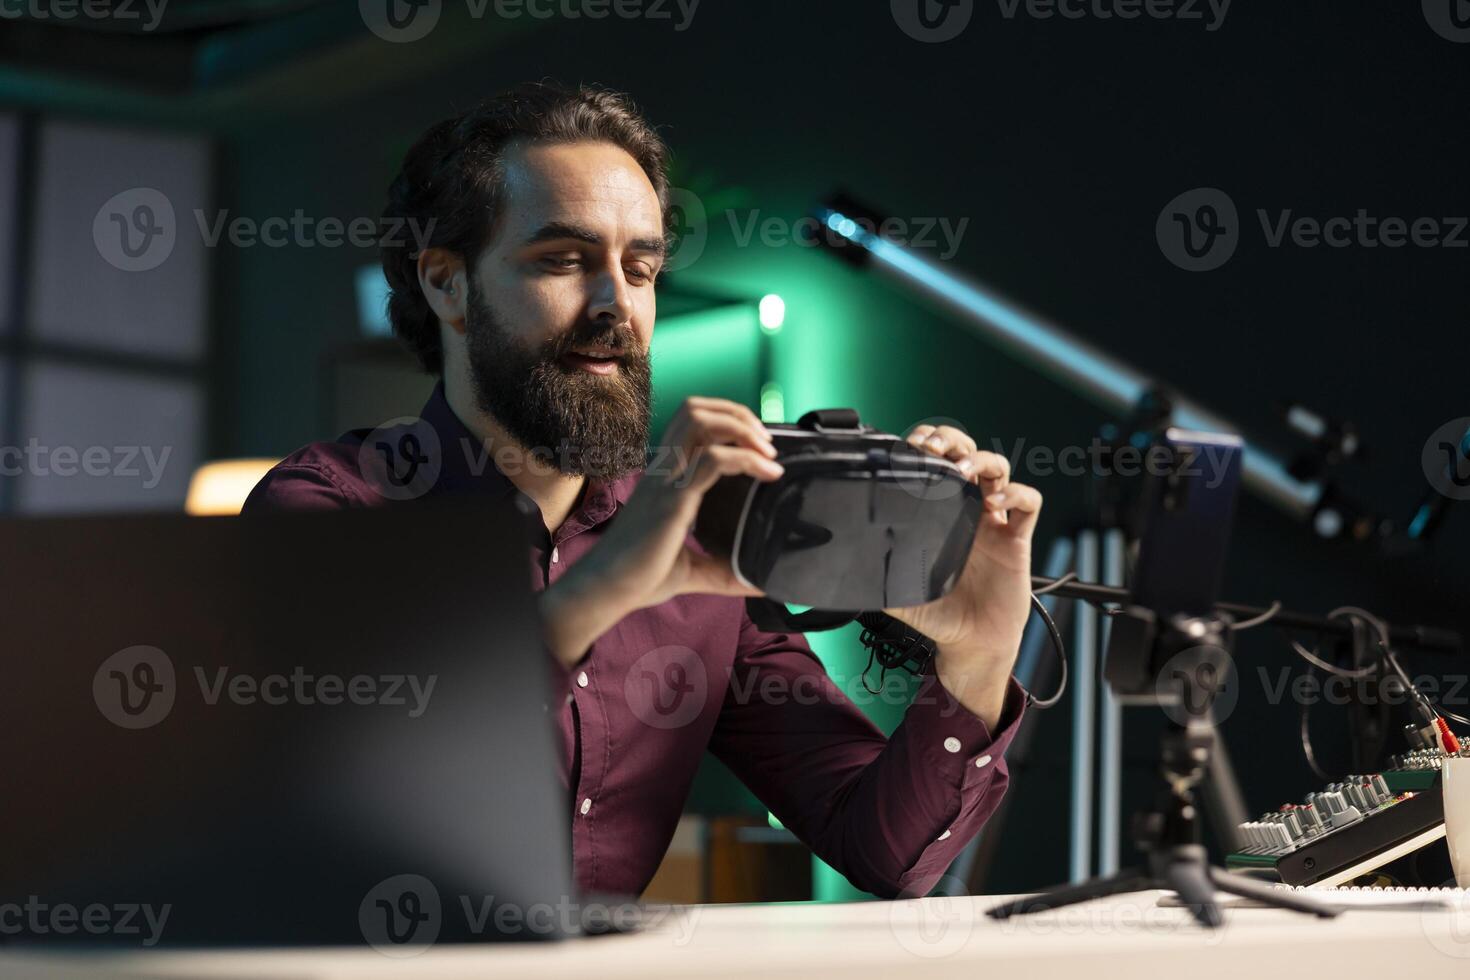 Tech expert assessing VR goggles performance, talking about components used inside, doing unboxing video. Entertainer unpacking virtual reality headset to review it on technology online channel photo